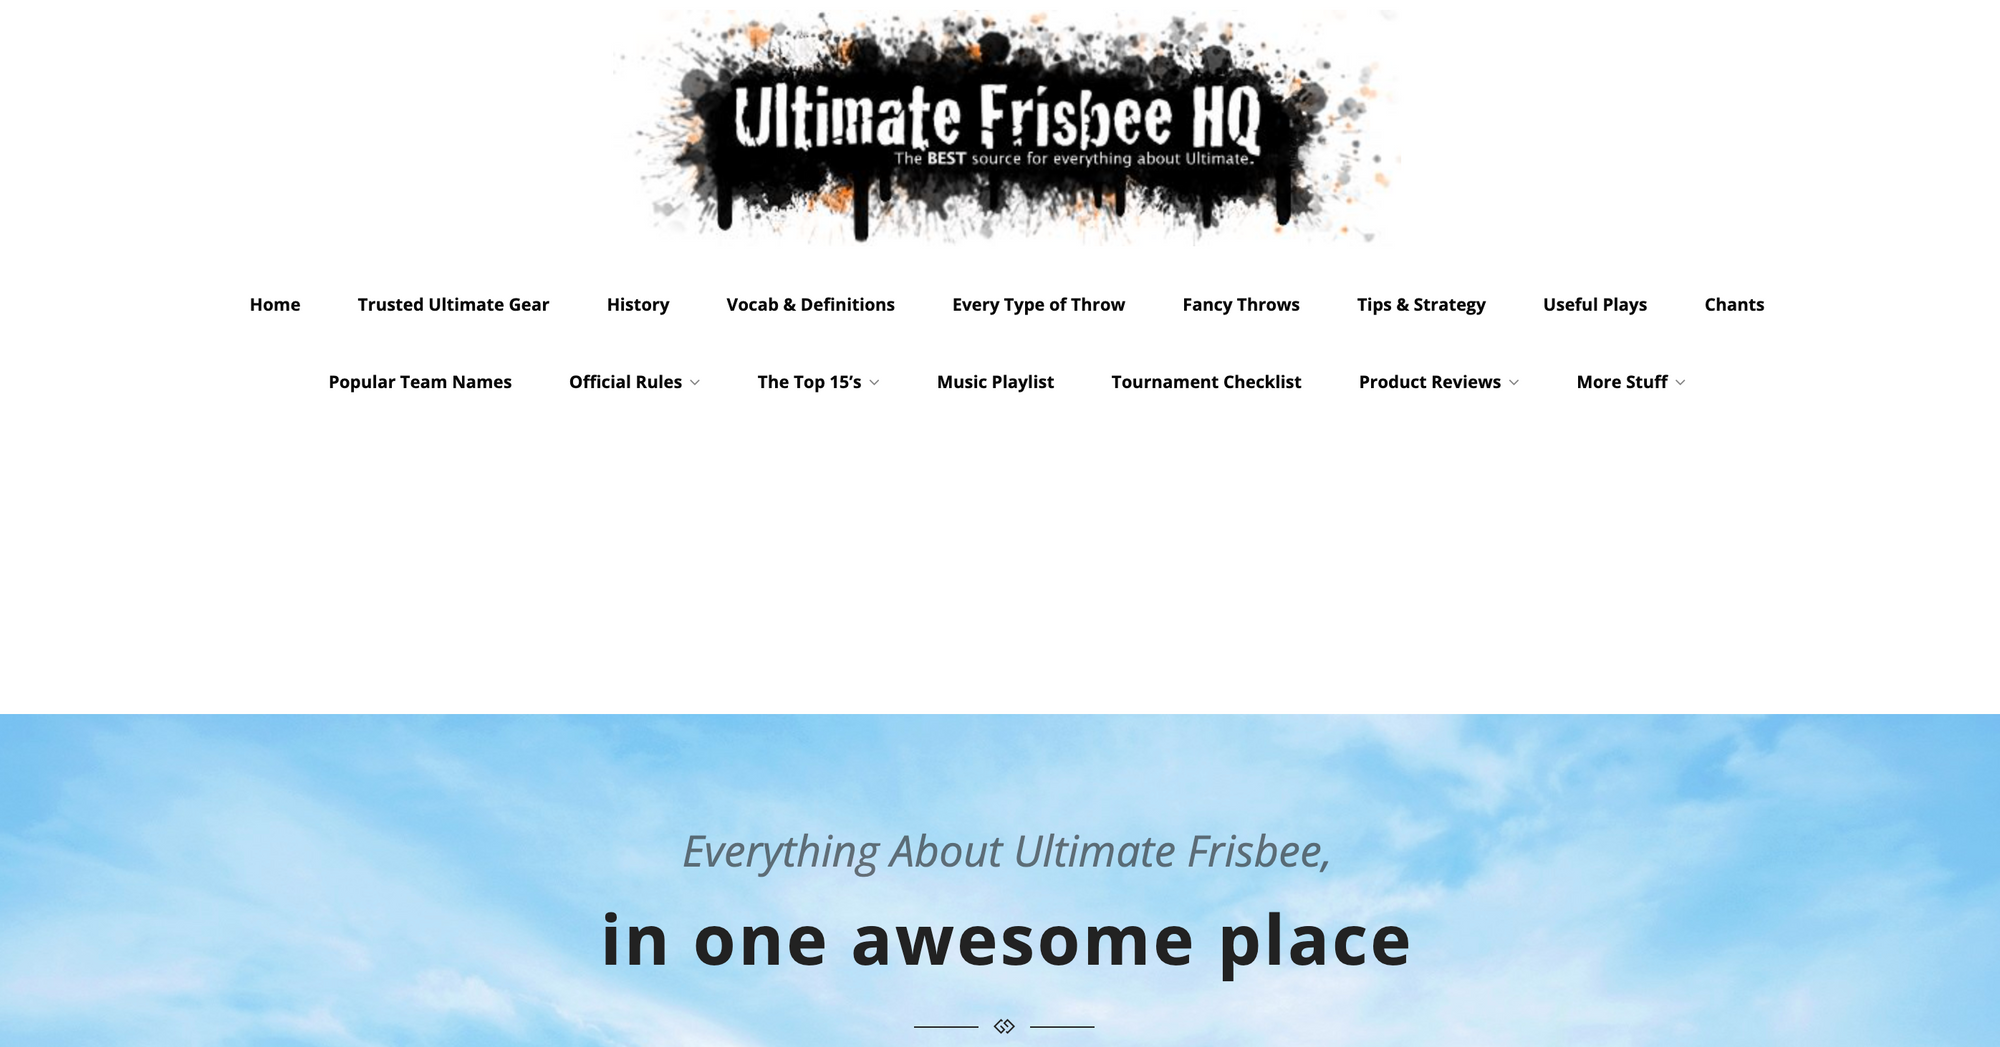 Ultimate Frisbee HQ